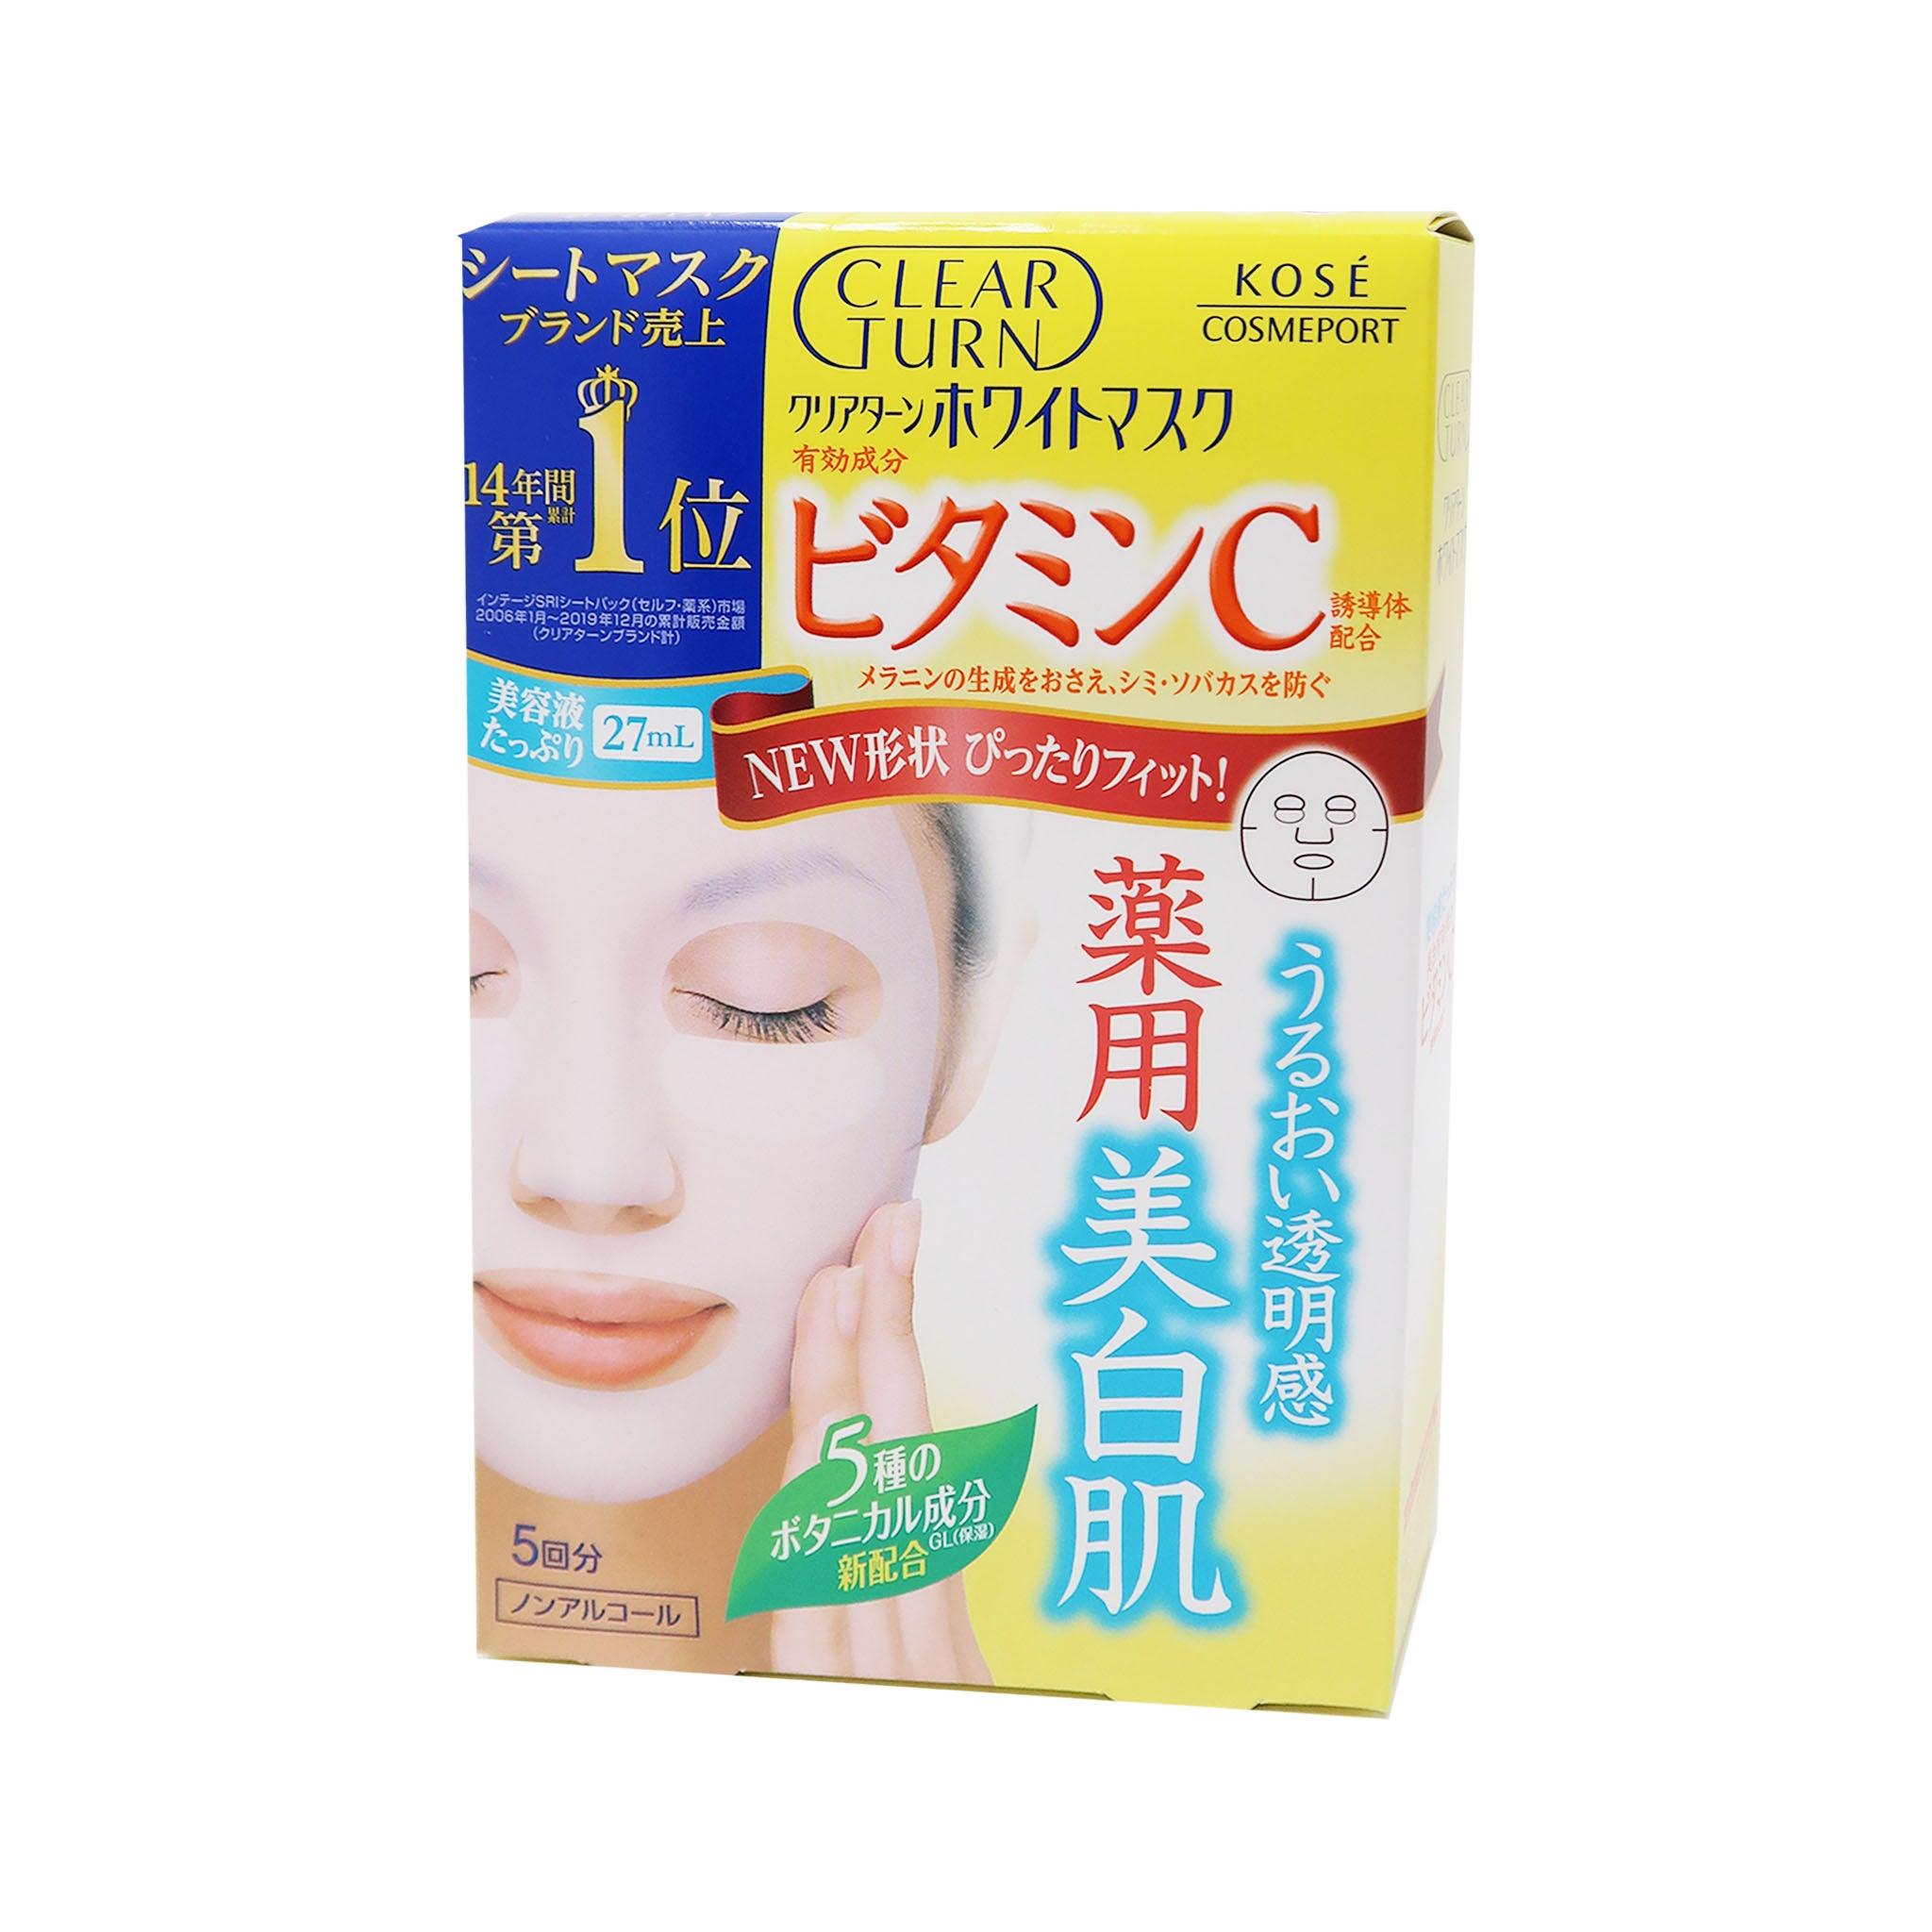 KOSE COSMEPORT Clear Turn White Mask - Vitamin C [5PC]